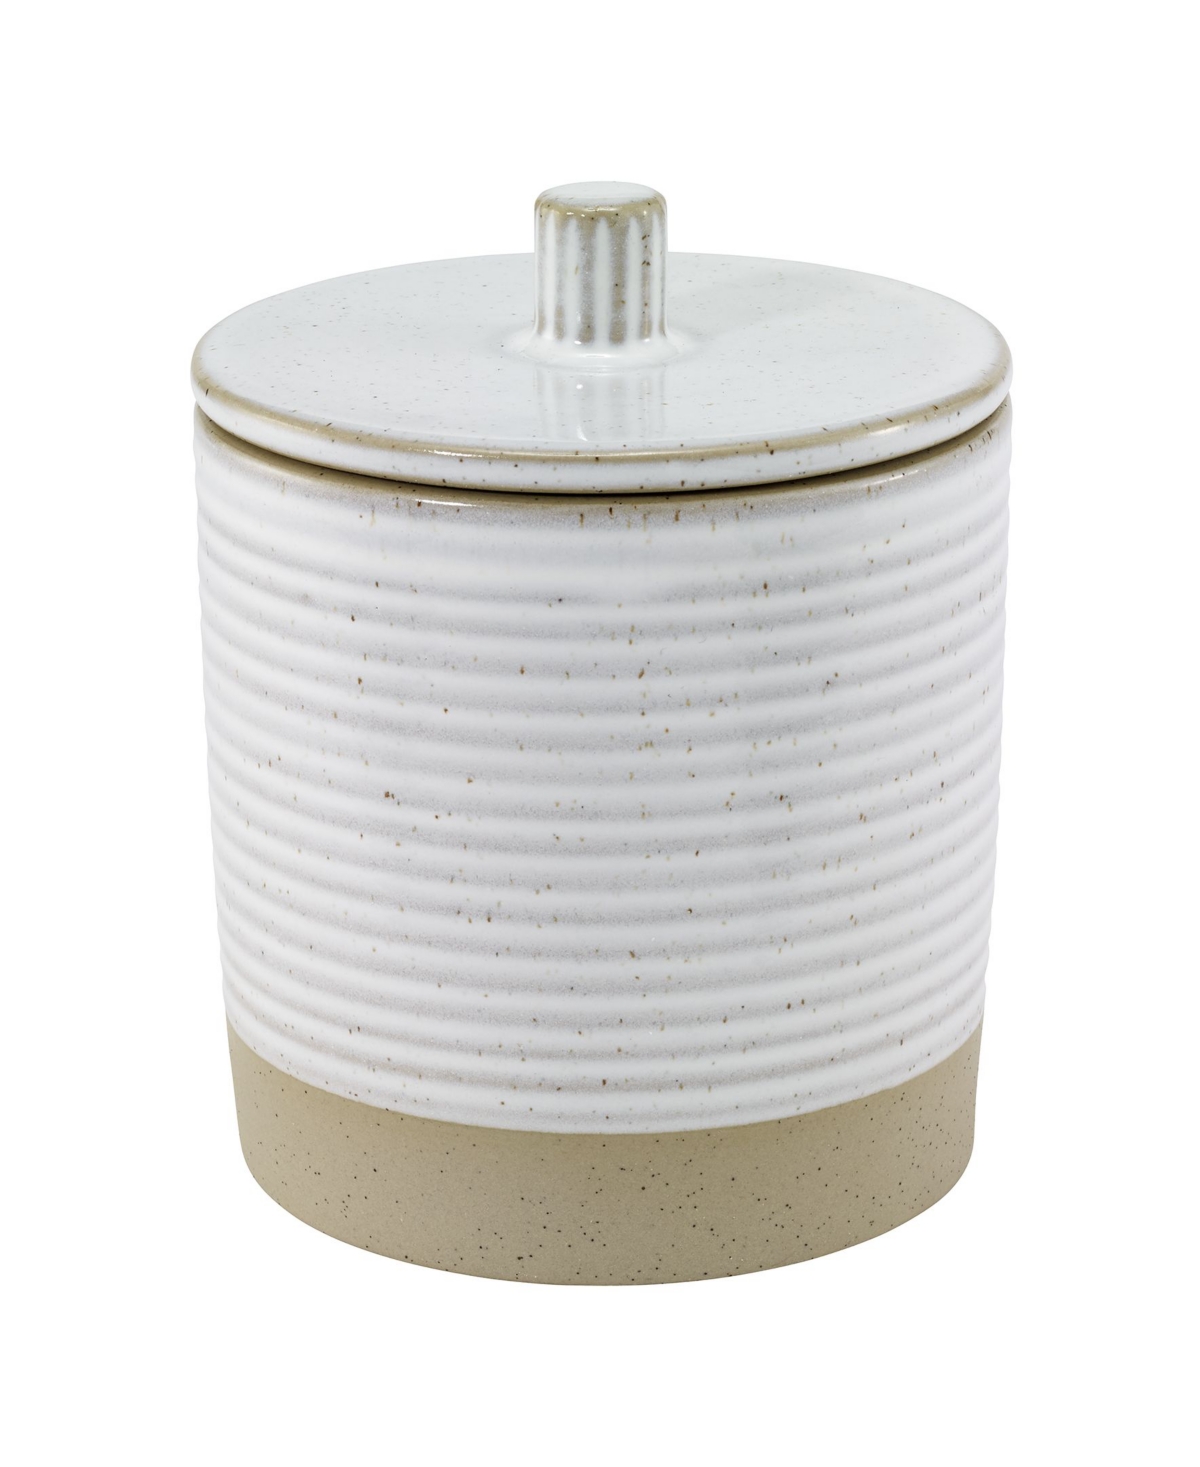 Drift Lines Textured Ribbed Ceramic Covered Jar - Linen